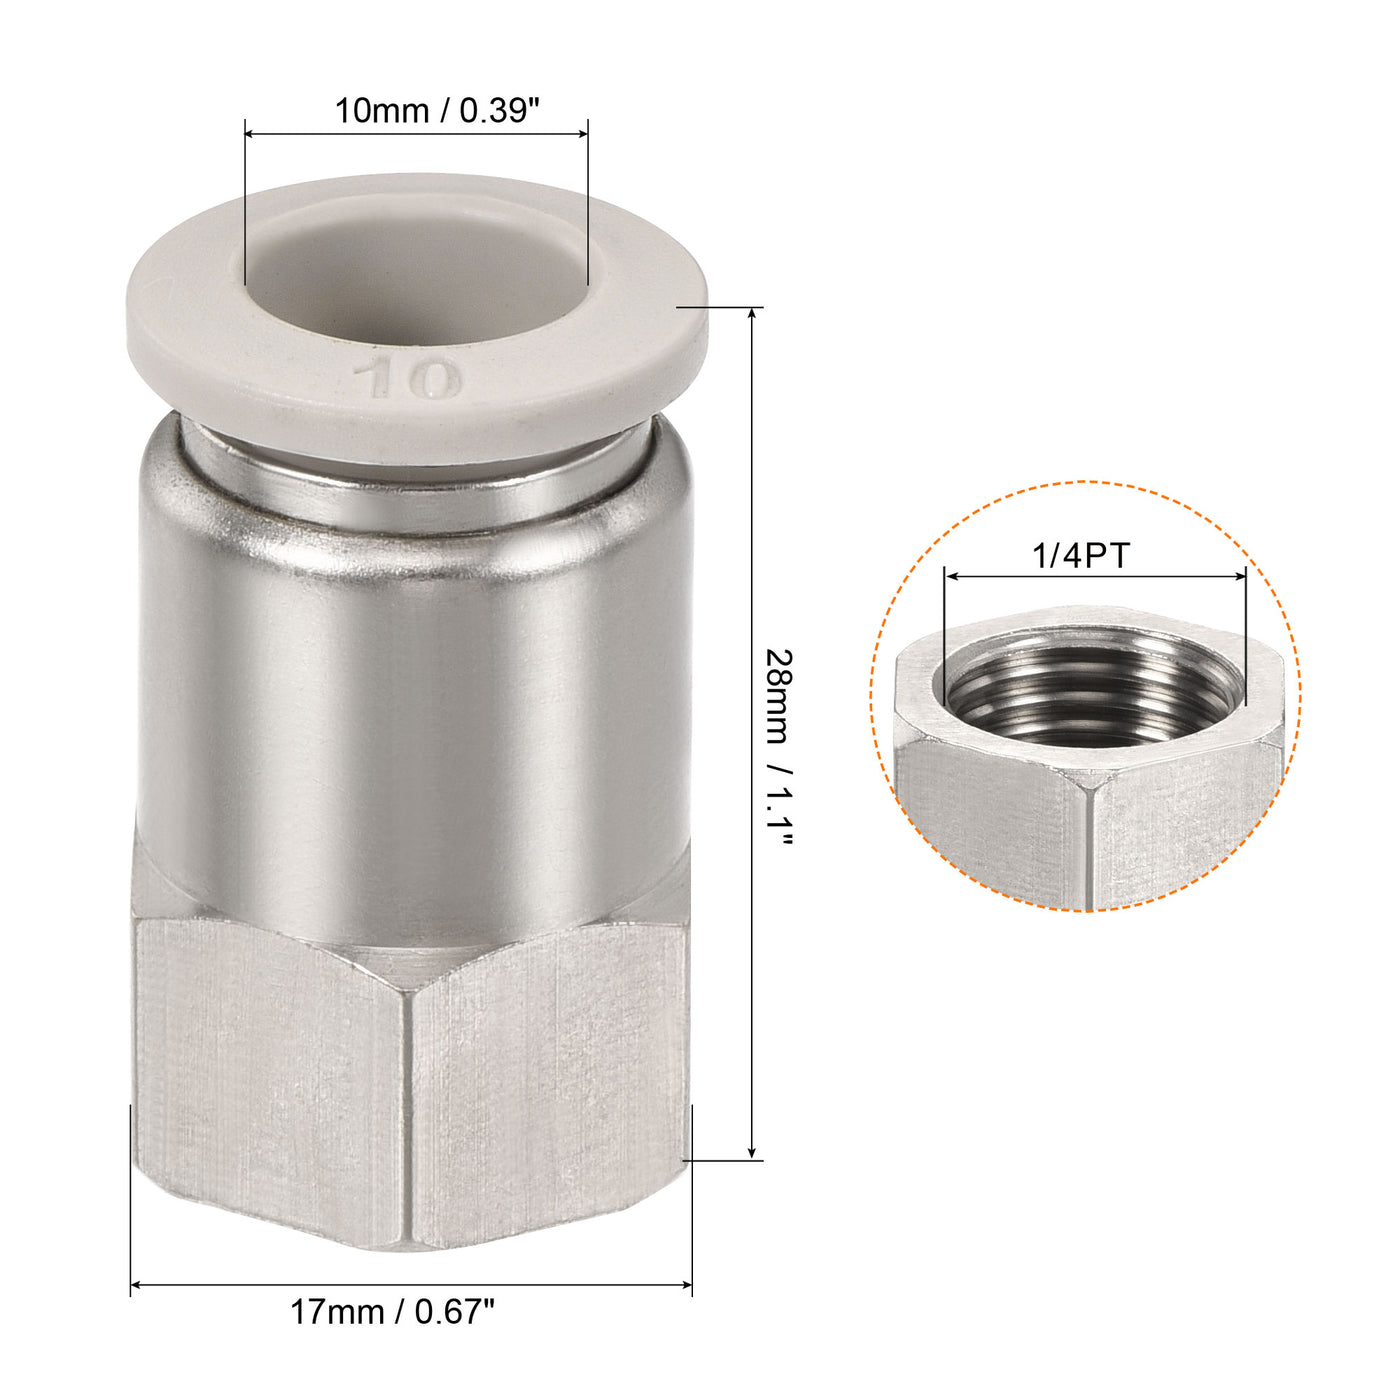 Harfington Push to Connect Fittings 1/4PT Female Thread Fit 10mm Tube OD Nickel-plated Copper Straight Union Fitting, Pack of 2